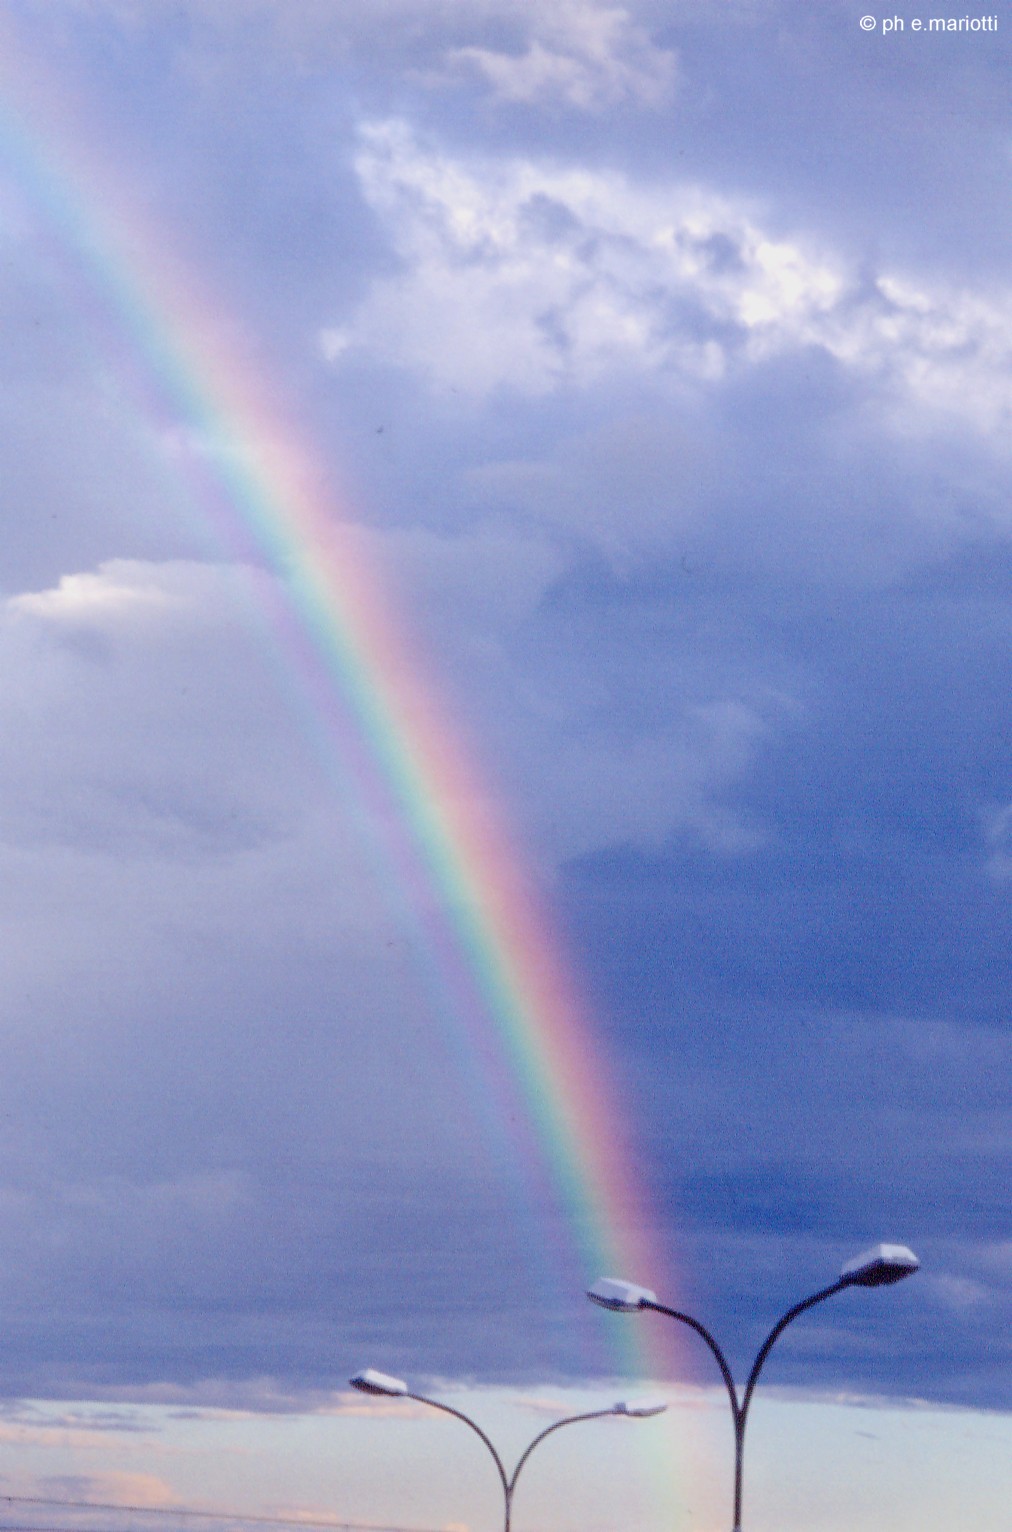 Rainbow with Supernumerary Rainbows from Codroipo: 231 KB; click on the image to enlarge at 1018x1532 pixels